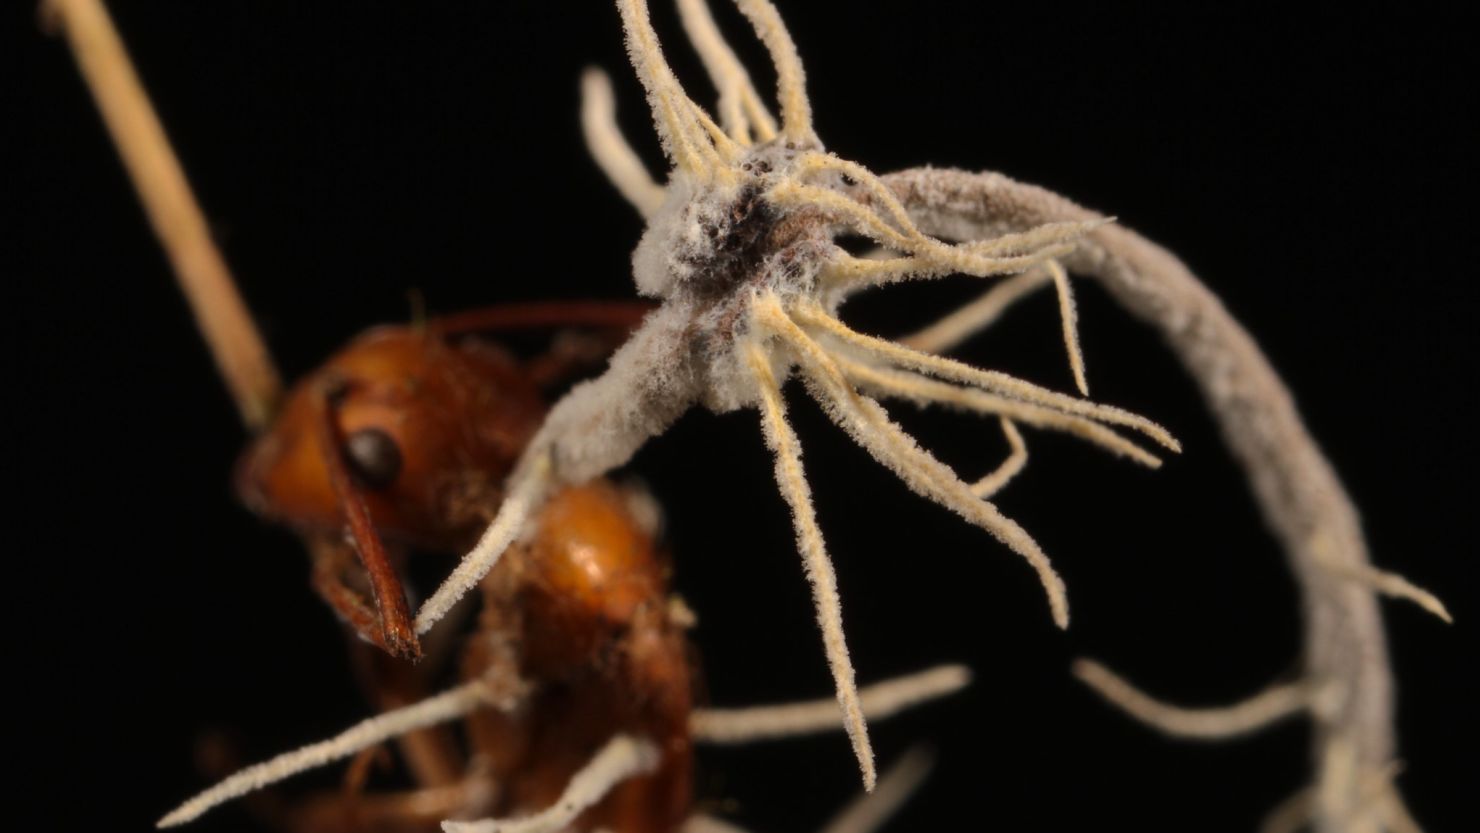 A fuzzy white fungus grows on top of the parasitic fungus that attacks and turns ants into "zombies."